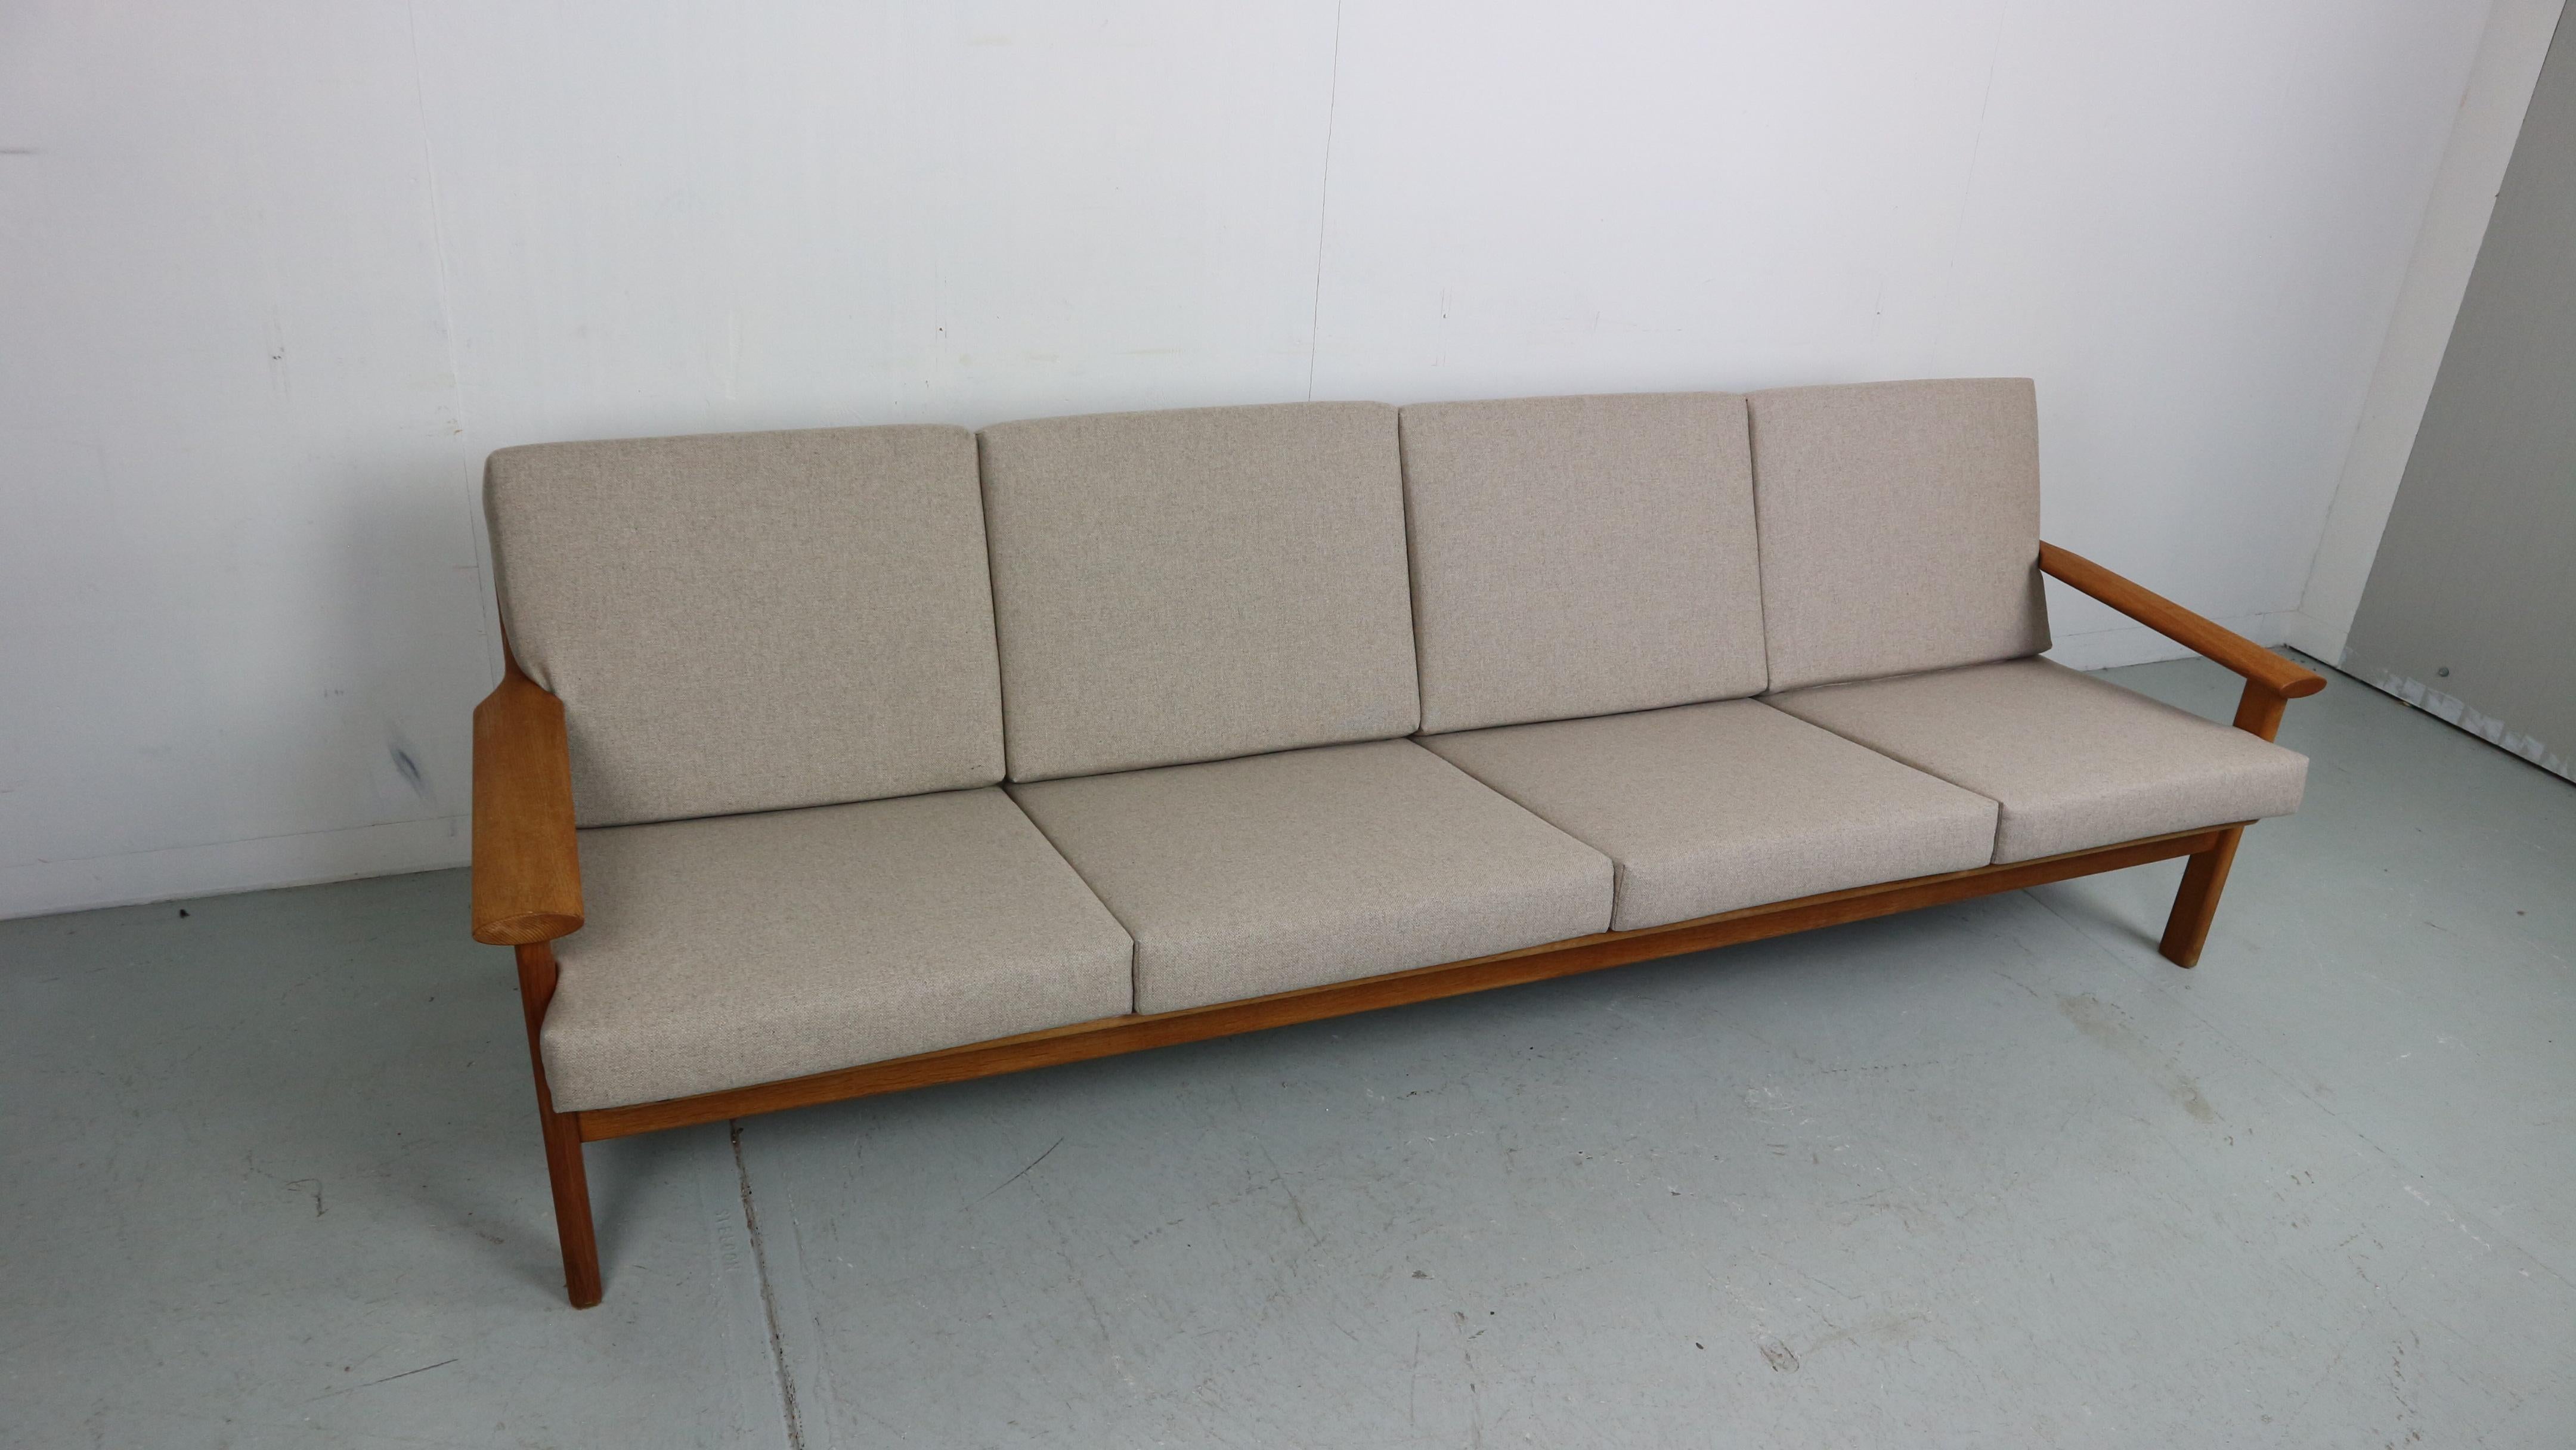 Poul M. Volther, four-seater sofa, model 390 for Frem Røjle Møbelfabrik. Structure of solid oak wood with loose cushion, newly filled and upholstered in light beige wool (shiitake) color. New webbing and refinished in furniture oil.
Cushion fabric